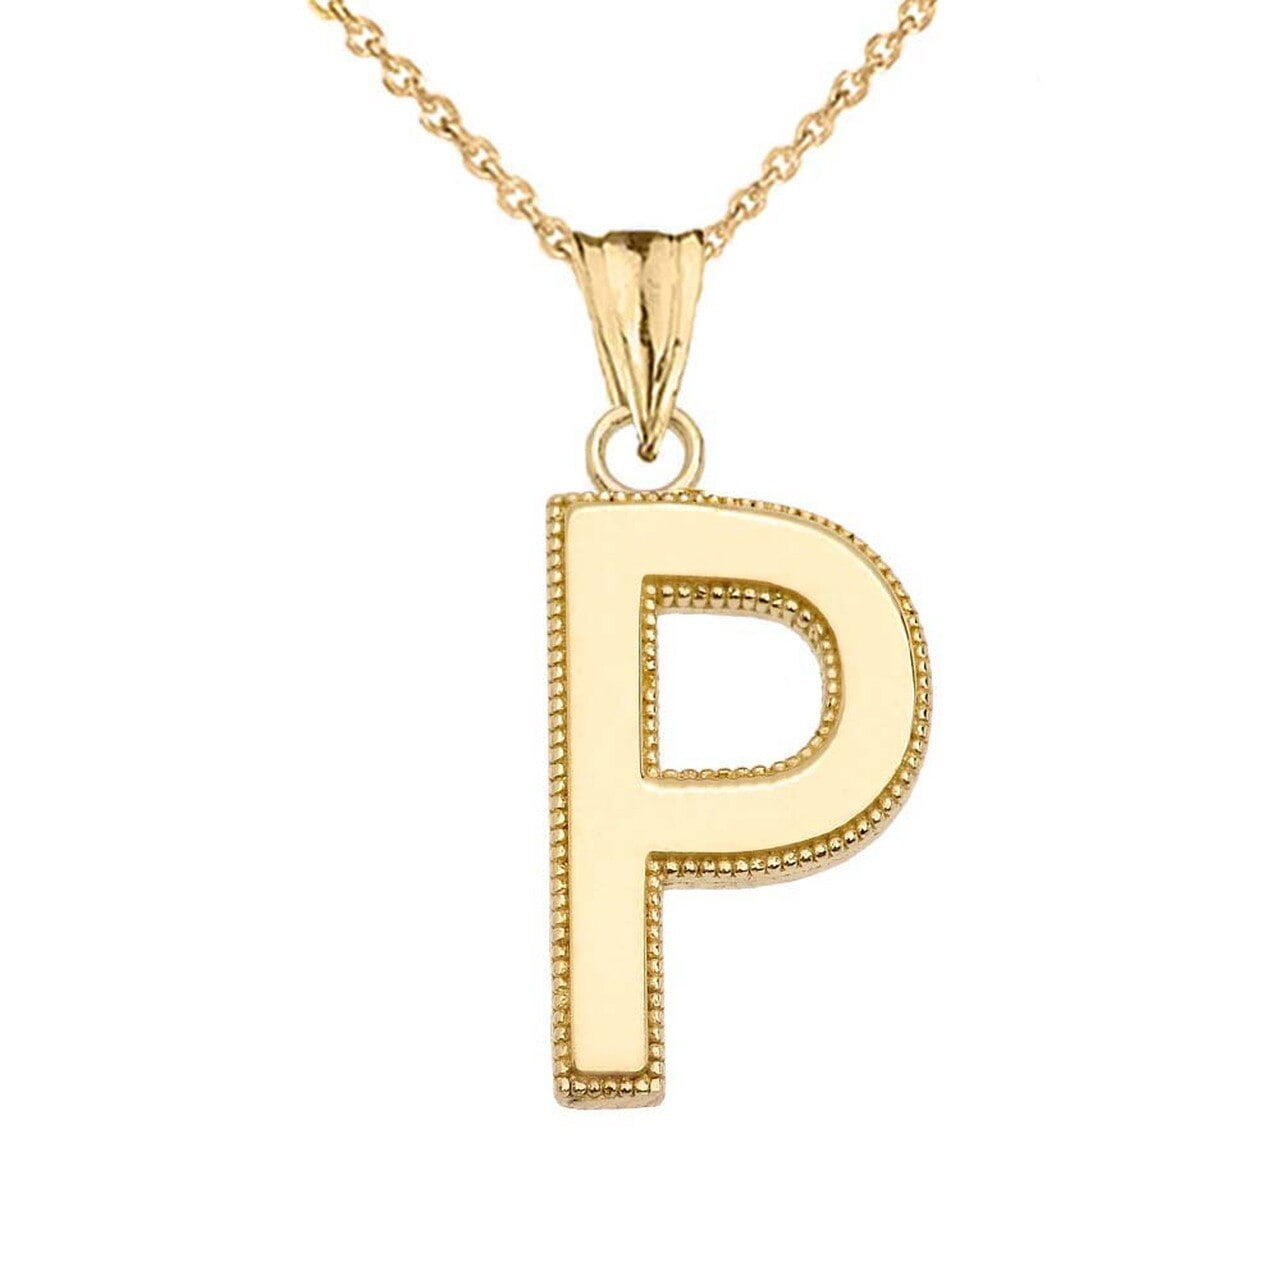 PERSONALIZED YELLOW GOLD MILGRAIN INITIAL PENDANT NECKLACE : 10K ...